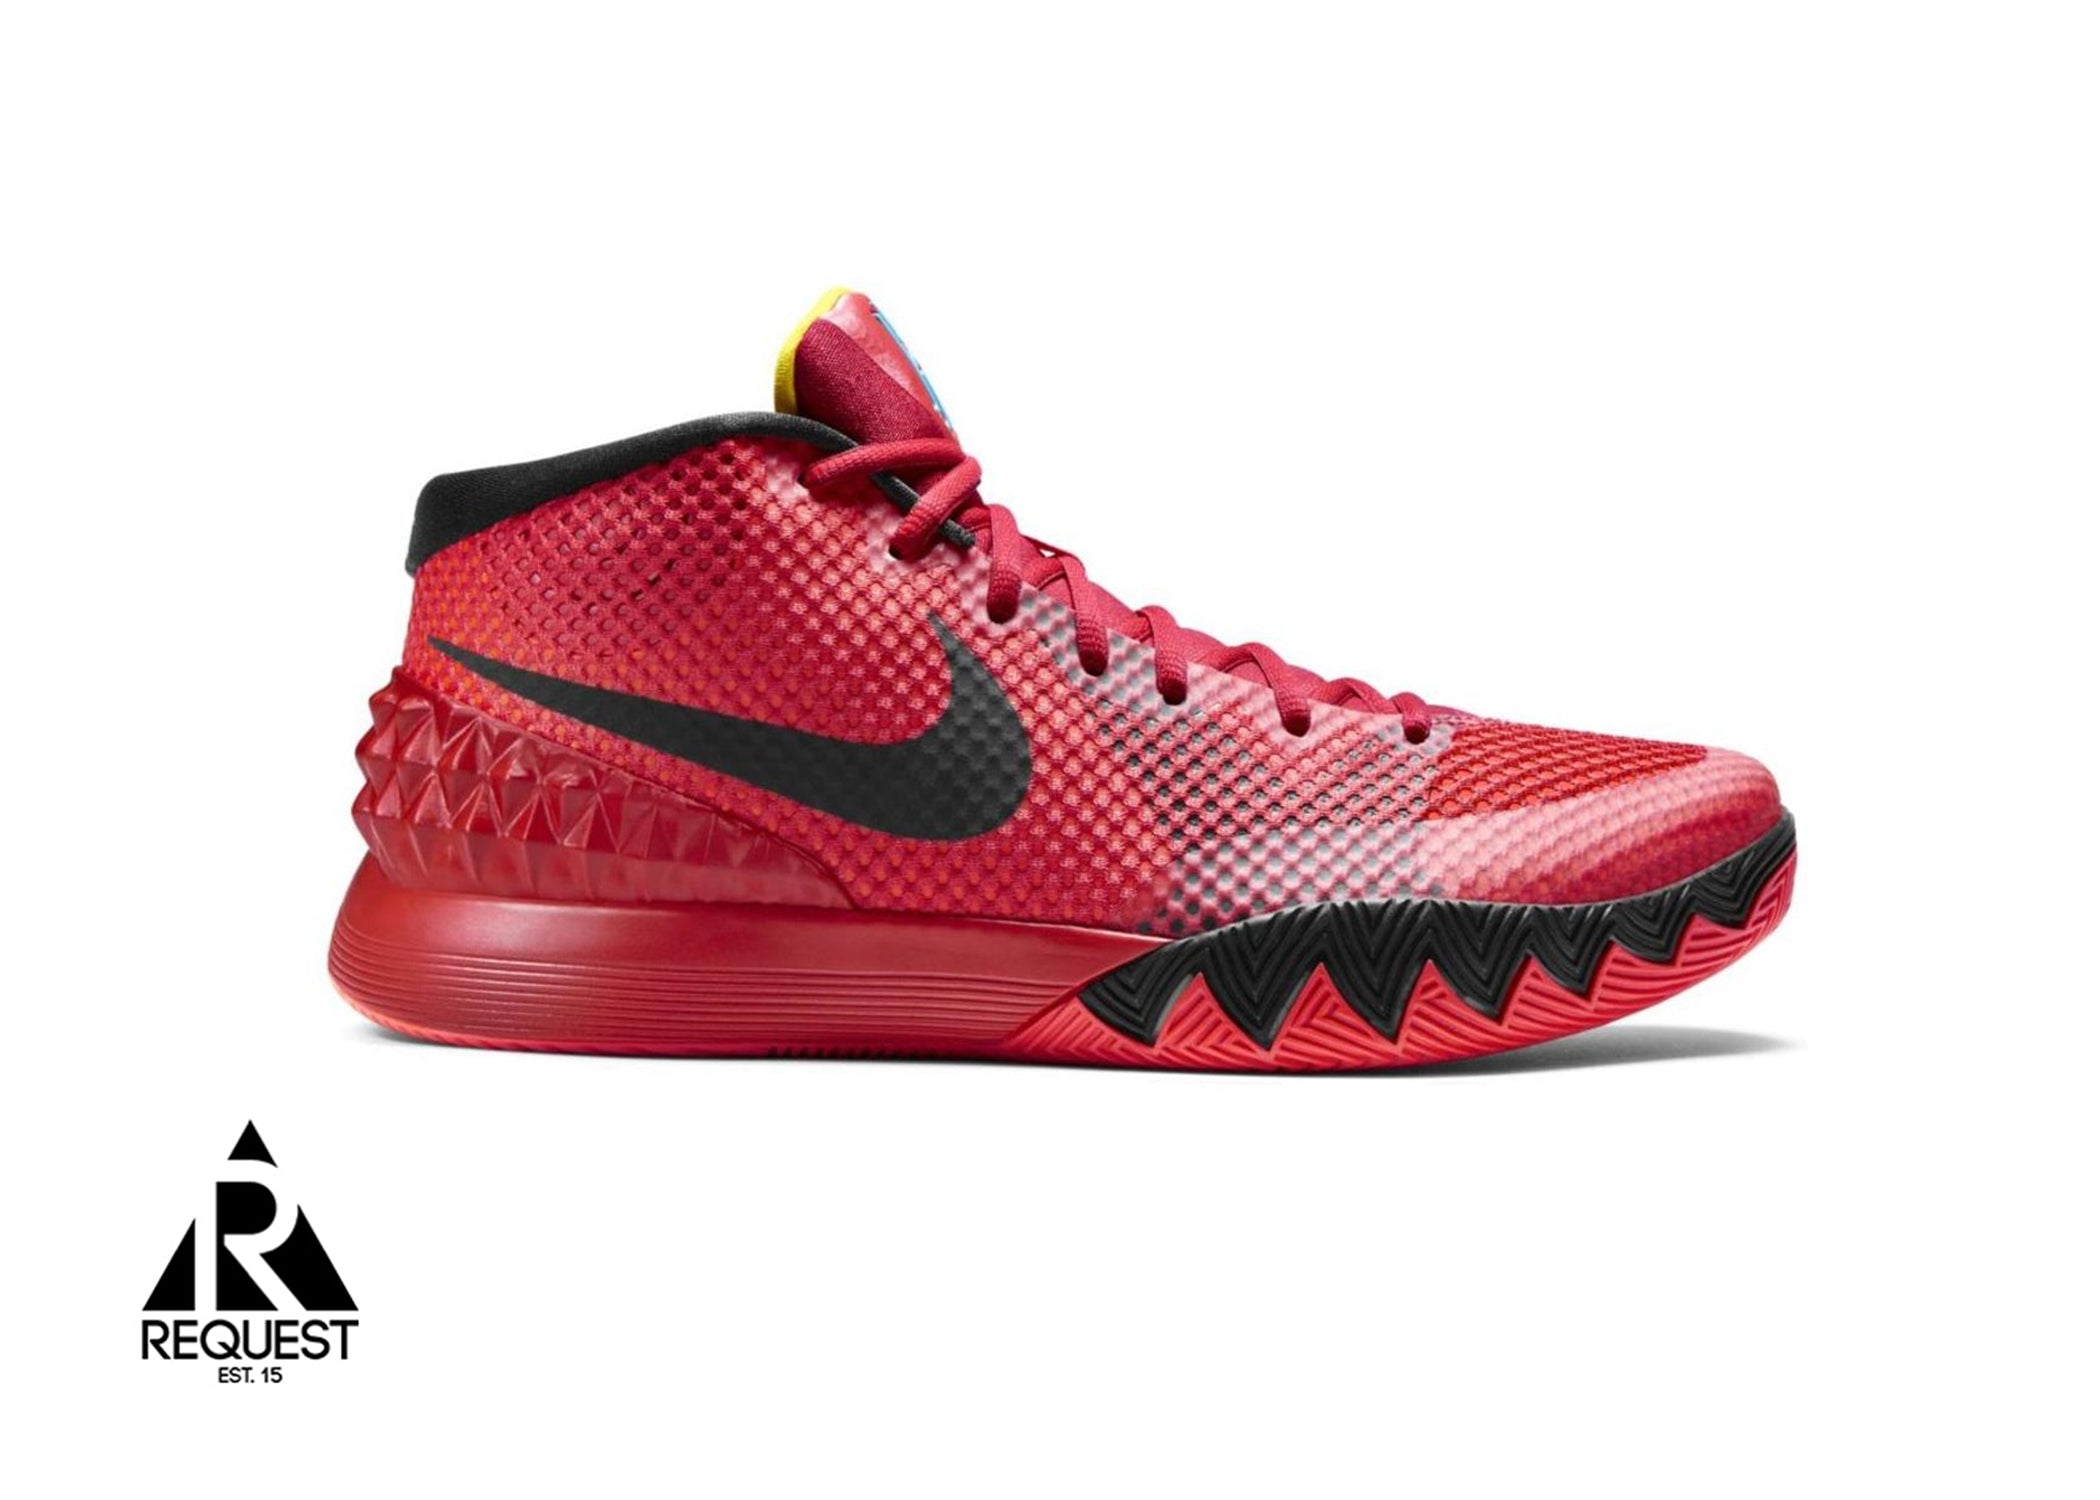 Kyrie 1 “Deceptive Red”